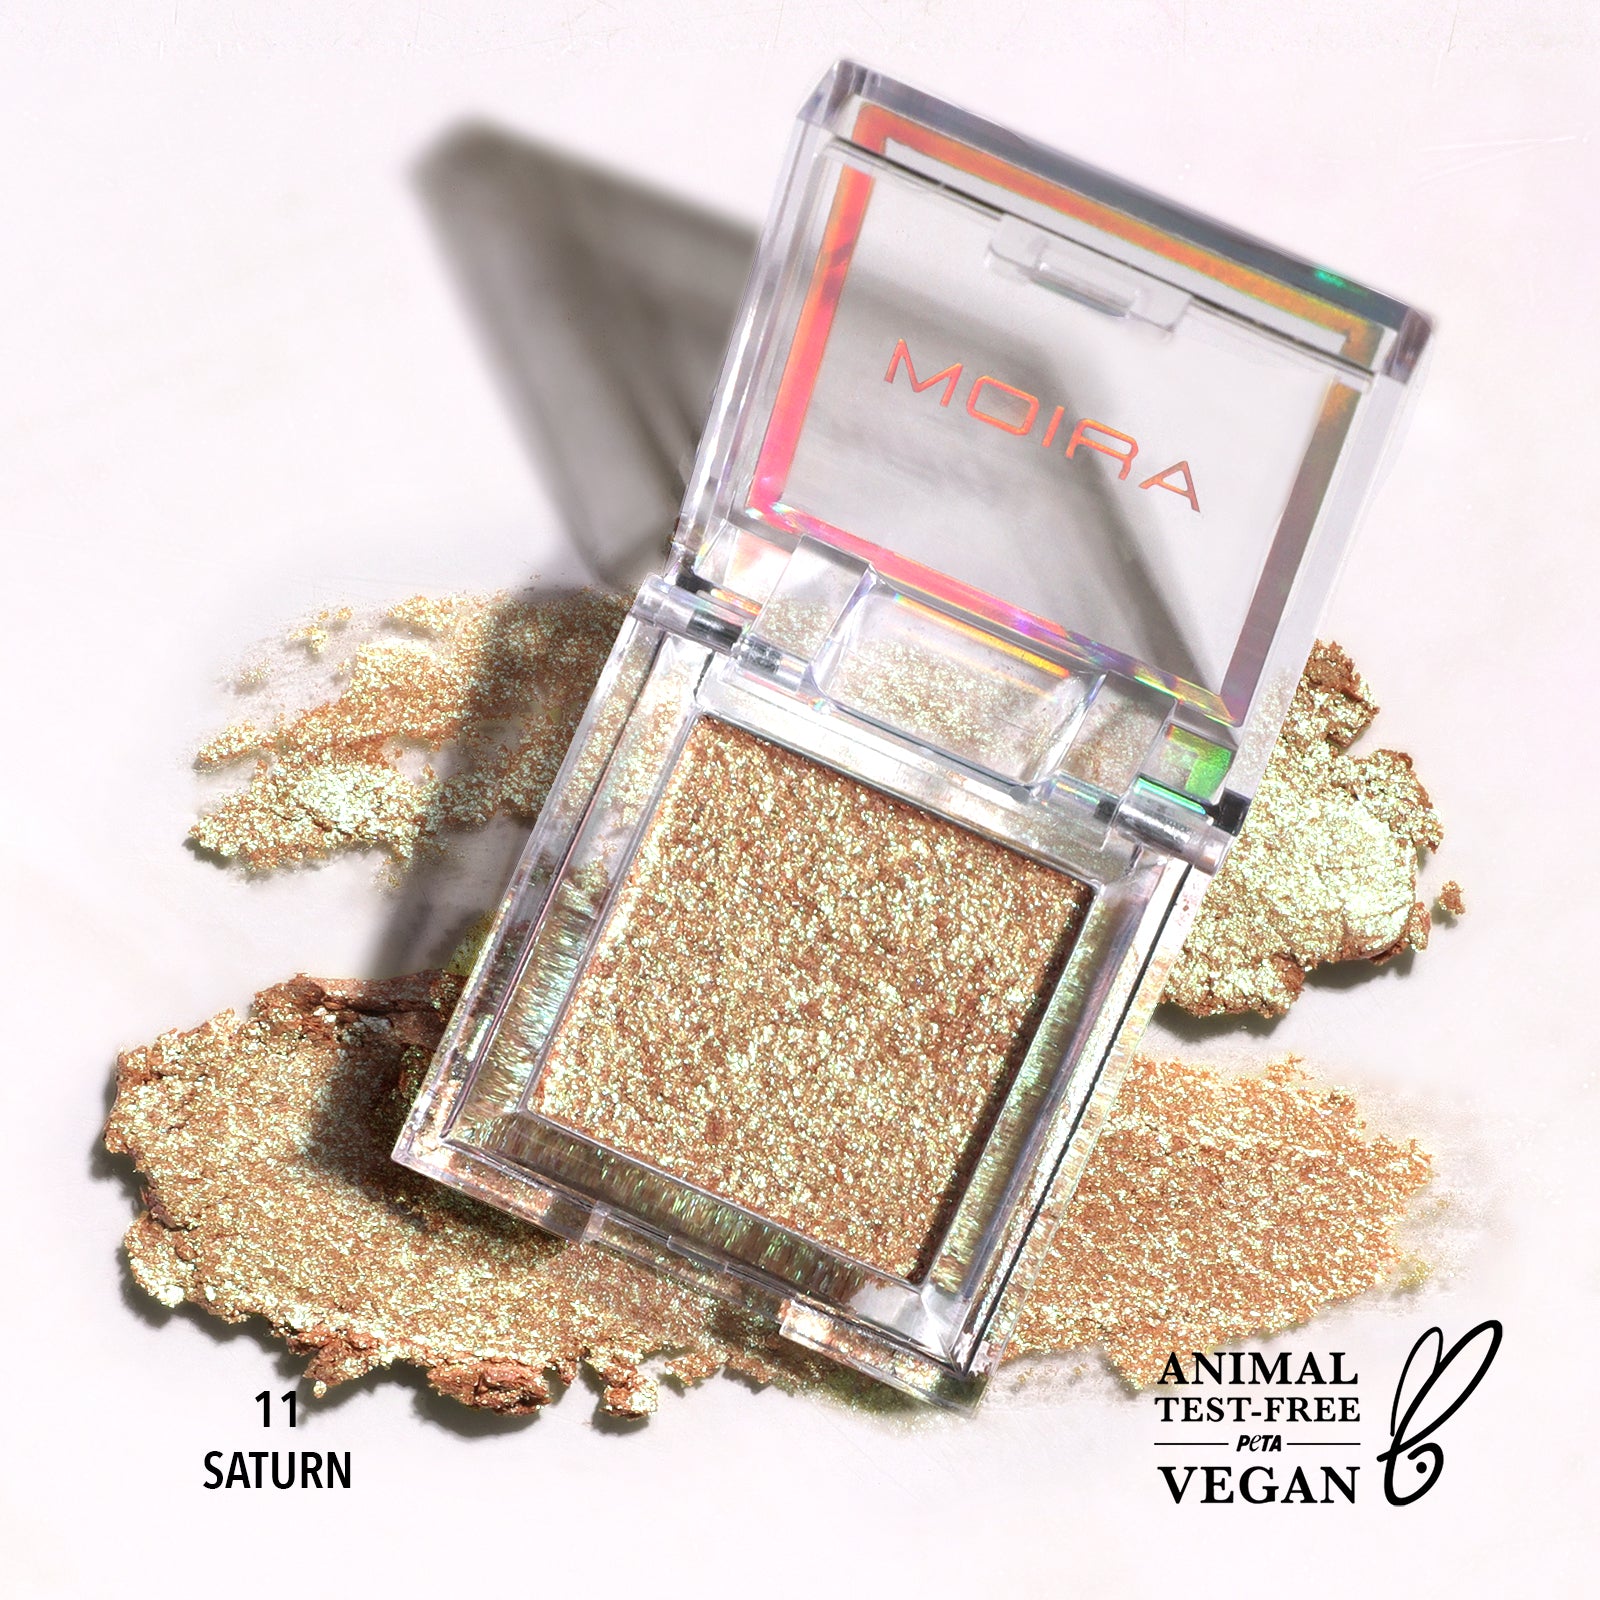 Moira Cosmetics - Sparkle this summer with our Lucent Cream Shadow! 18  colors to choose from 🙌🤩✨ ⠀⠀⠀⠀⠀⠀⠀⠀⠀ ⠀⠀⠀⠀⠀⠀⠀⠀⠀ ⠀⠀⠀⠀⠀⠀⠀⠀⠀ #MOIRA  #MOIRAcosmetics #Eyeshadow #makeup #makeuphaul #cosmetics #beauty  #crueltyfree #vegan